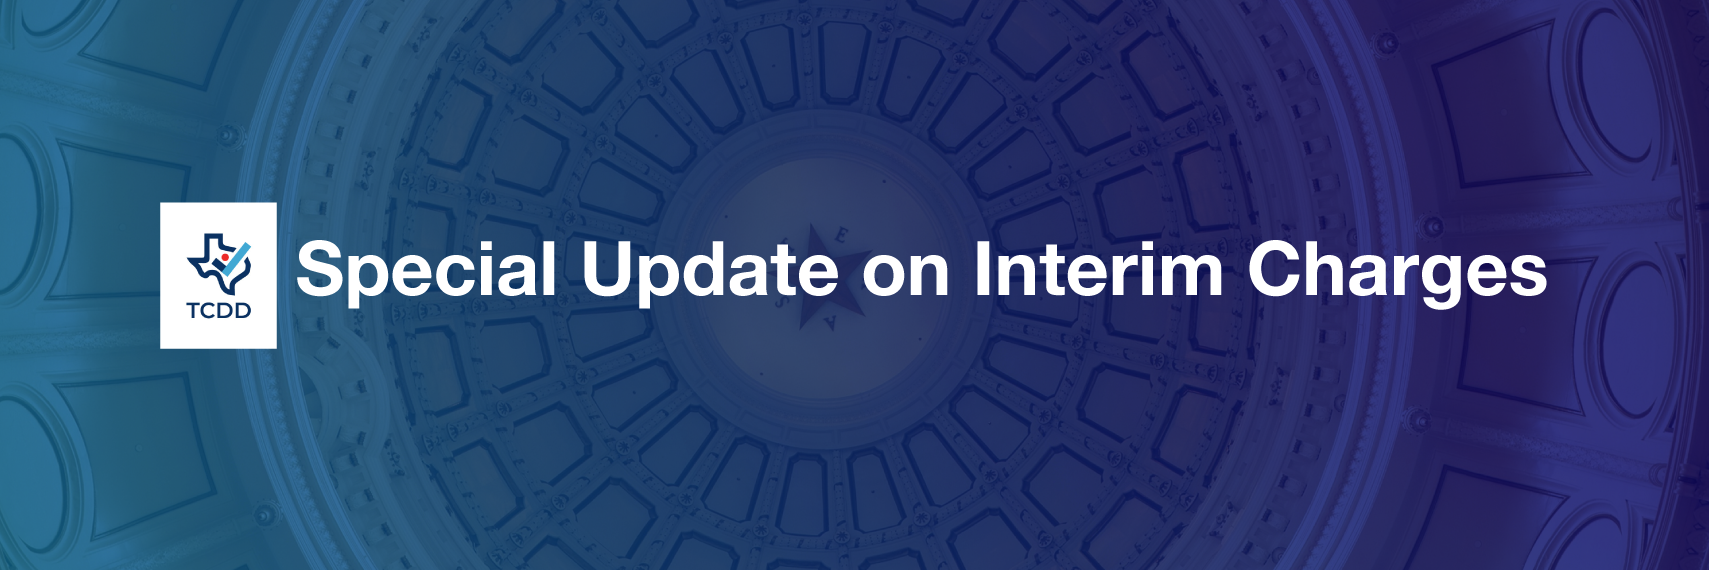 Special Update on Interim Charges